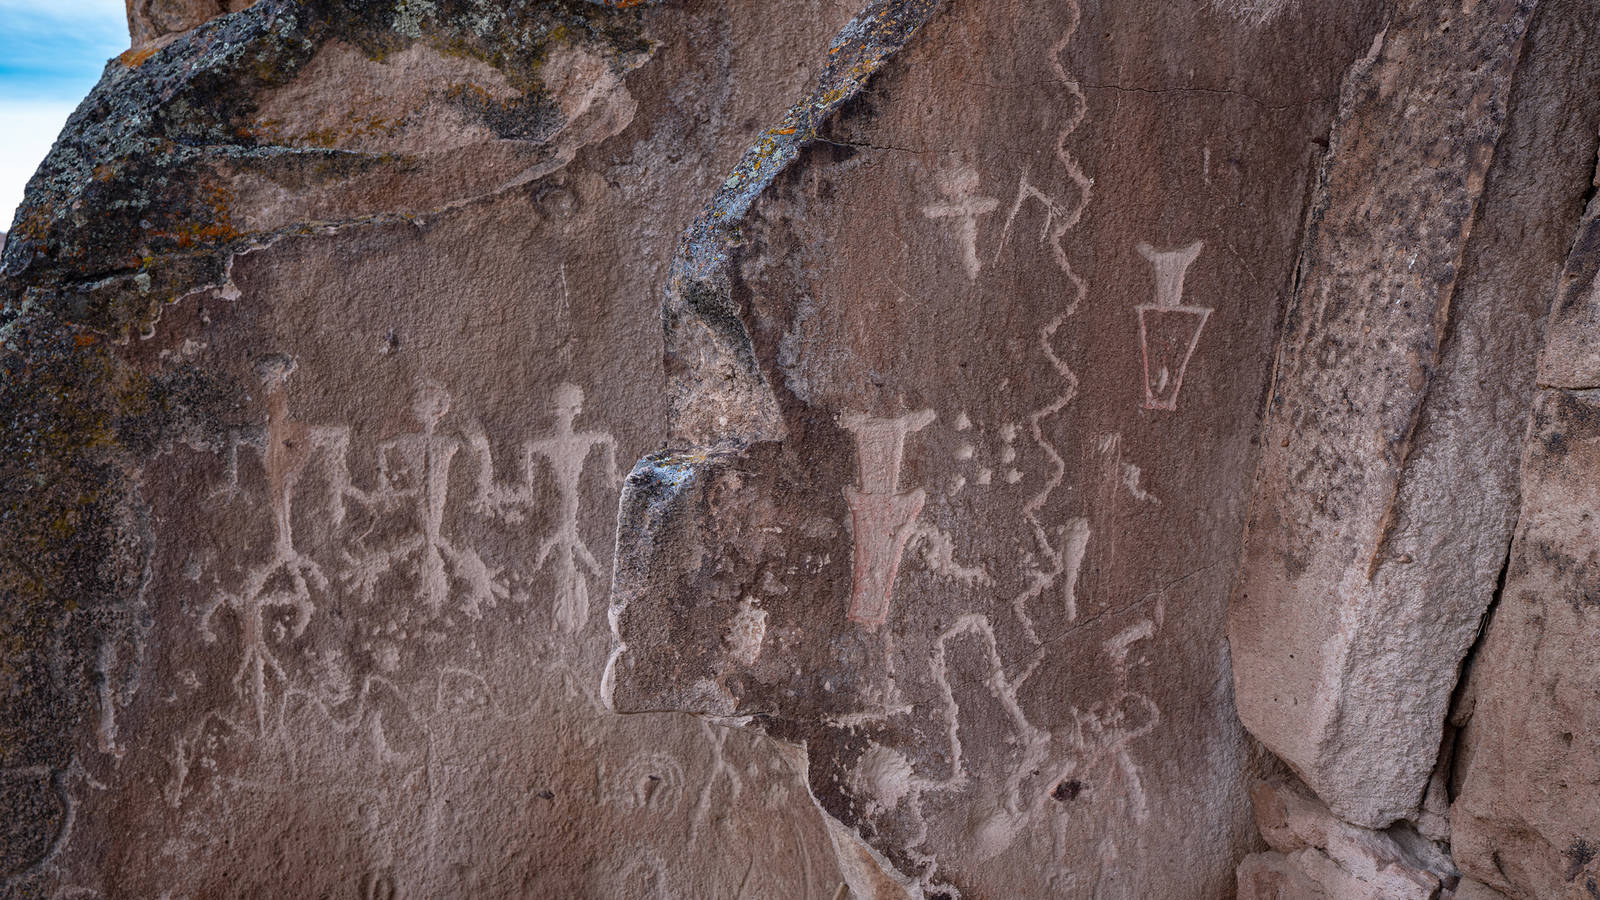 <h3 style="text-align: center; padding: 50px;"><span class="text-Intro-style">Petroglyphs in Basin and Range National Monument, Nevada. © STEPHEN ALVAREZ</span></h3>